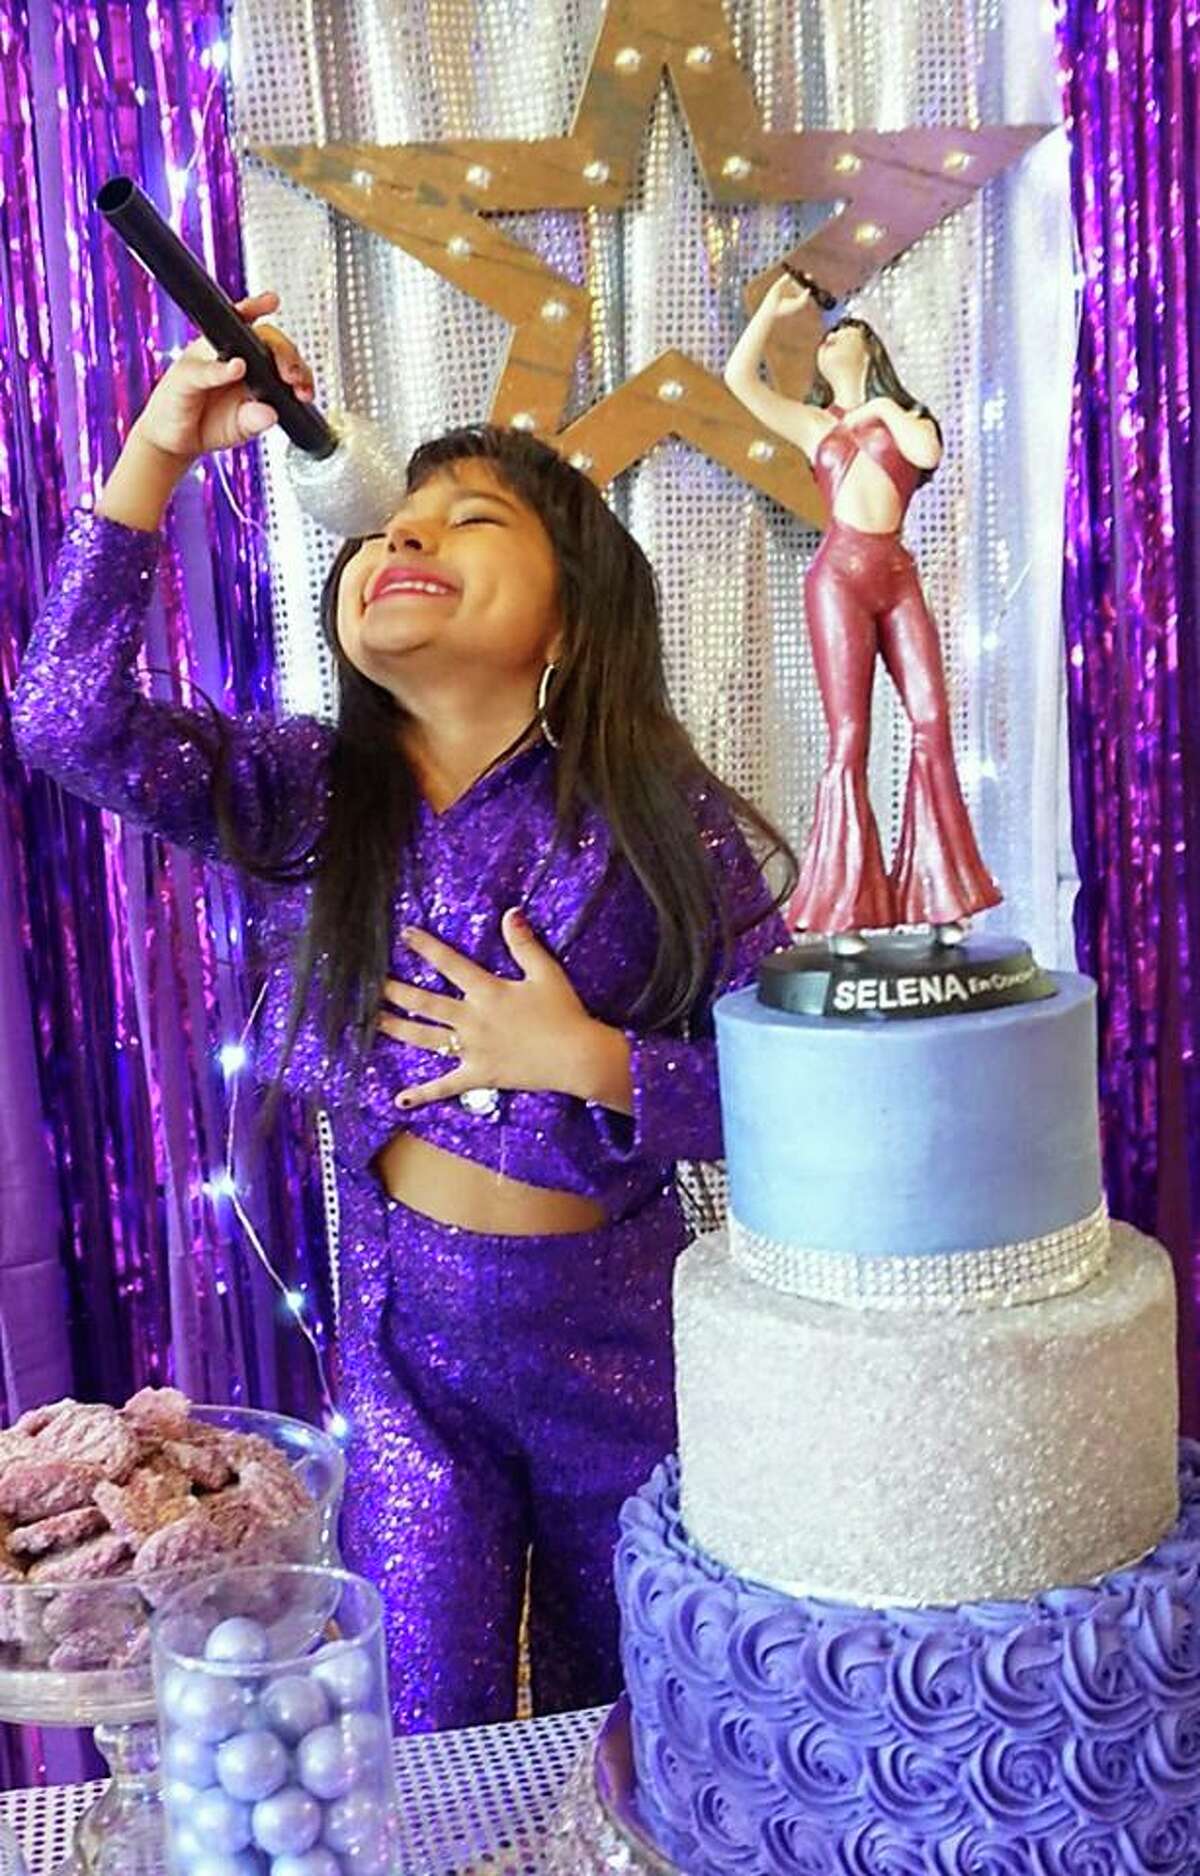 Family members describe 6-year-old Ayvah Vega as a little girl with a giant personality, who happens to be a Selena superfan. Her only request for her party last weekend was for the Queen of Tejano to be the theme.